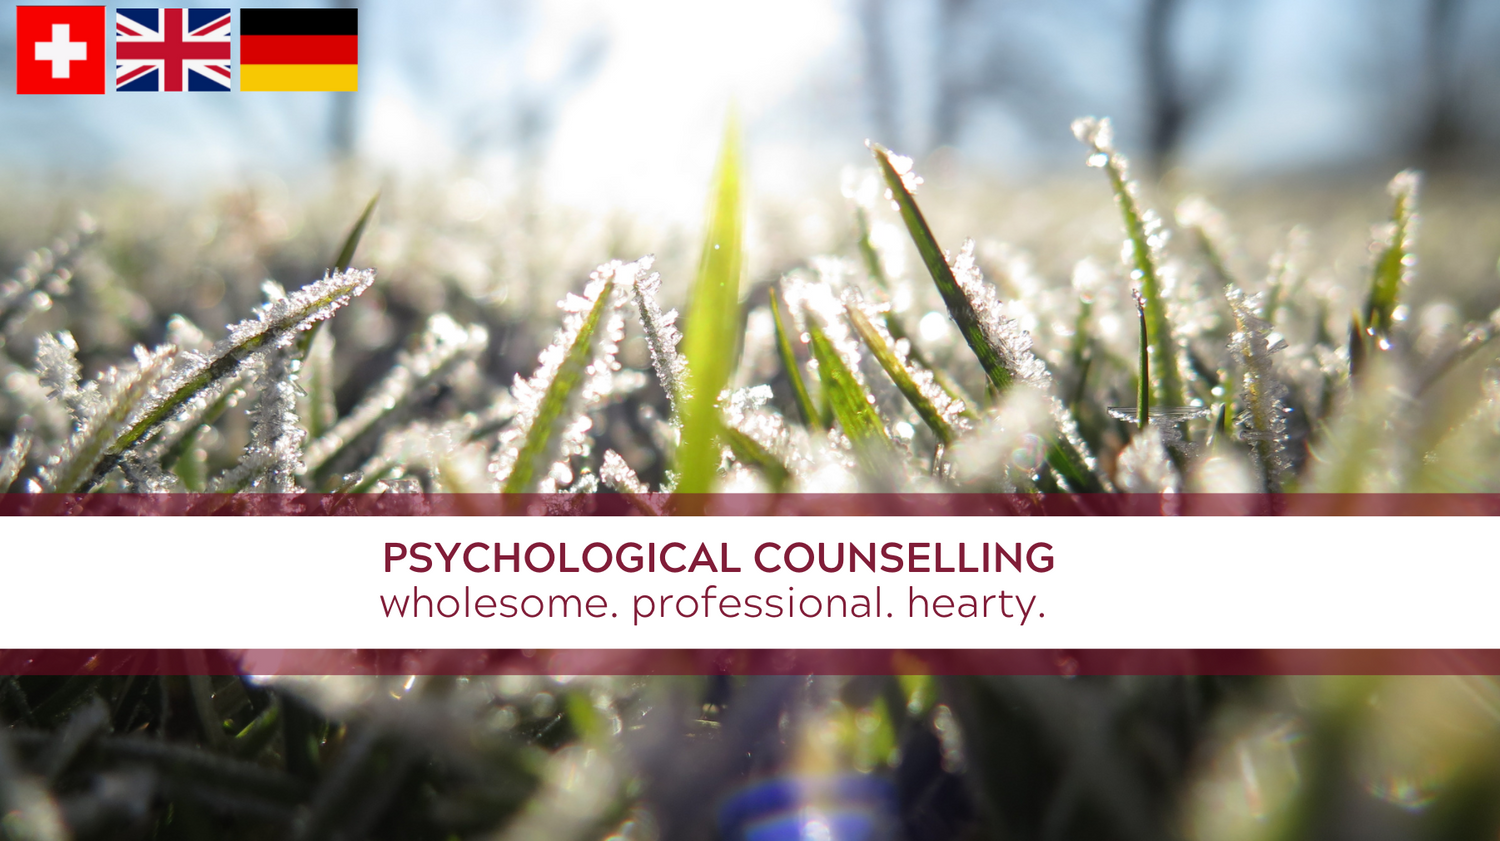 Gallery Photo of Counselling in English, German or Swiss German